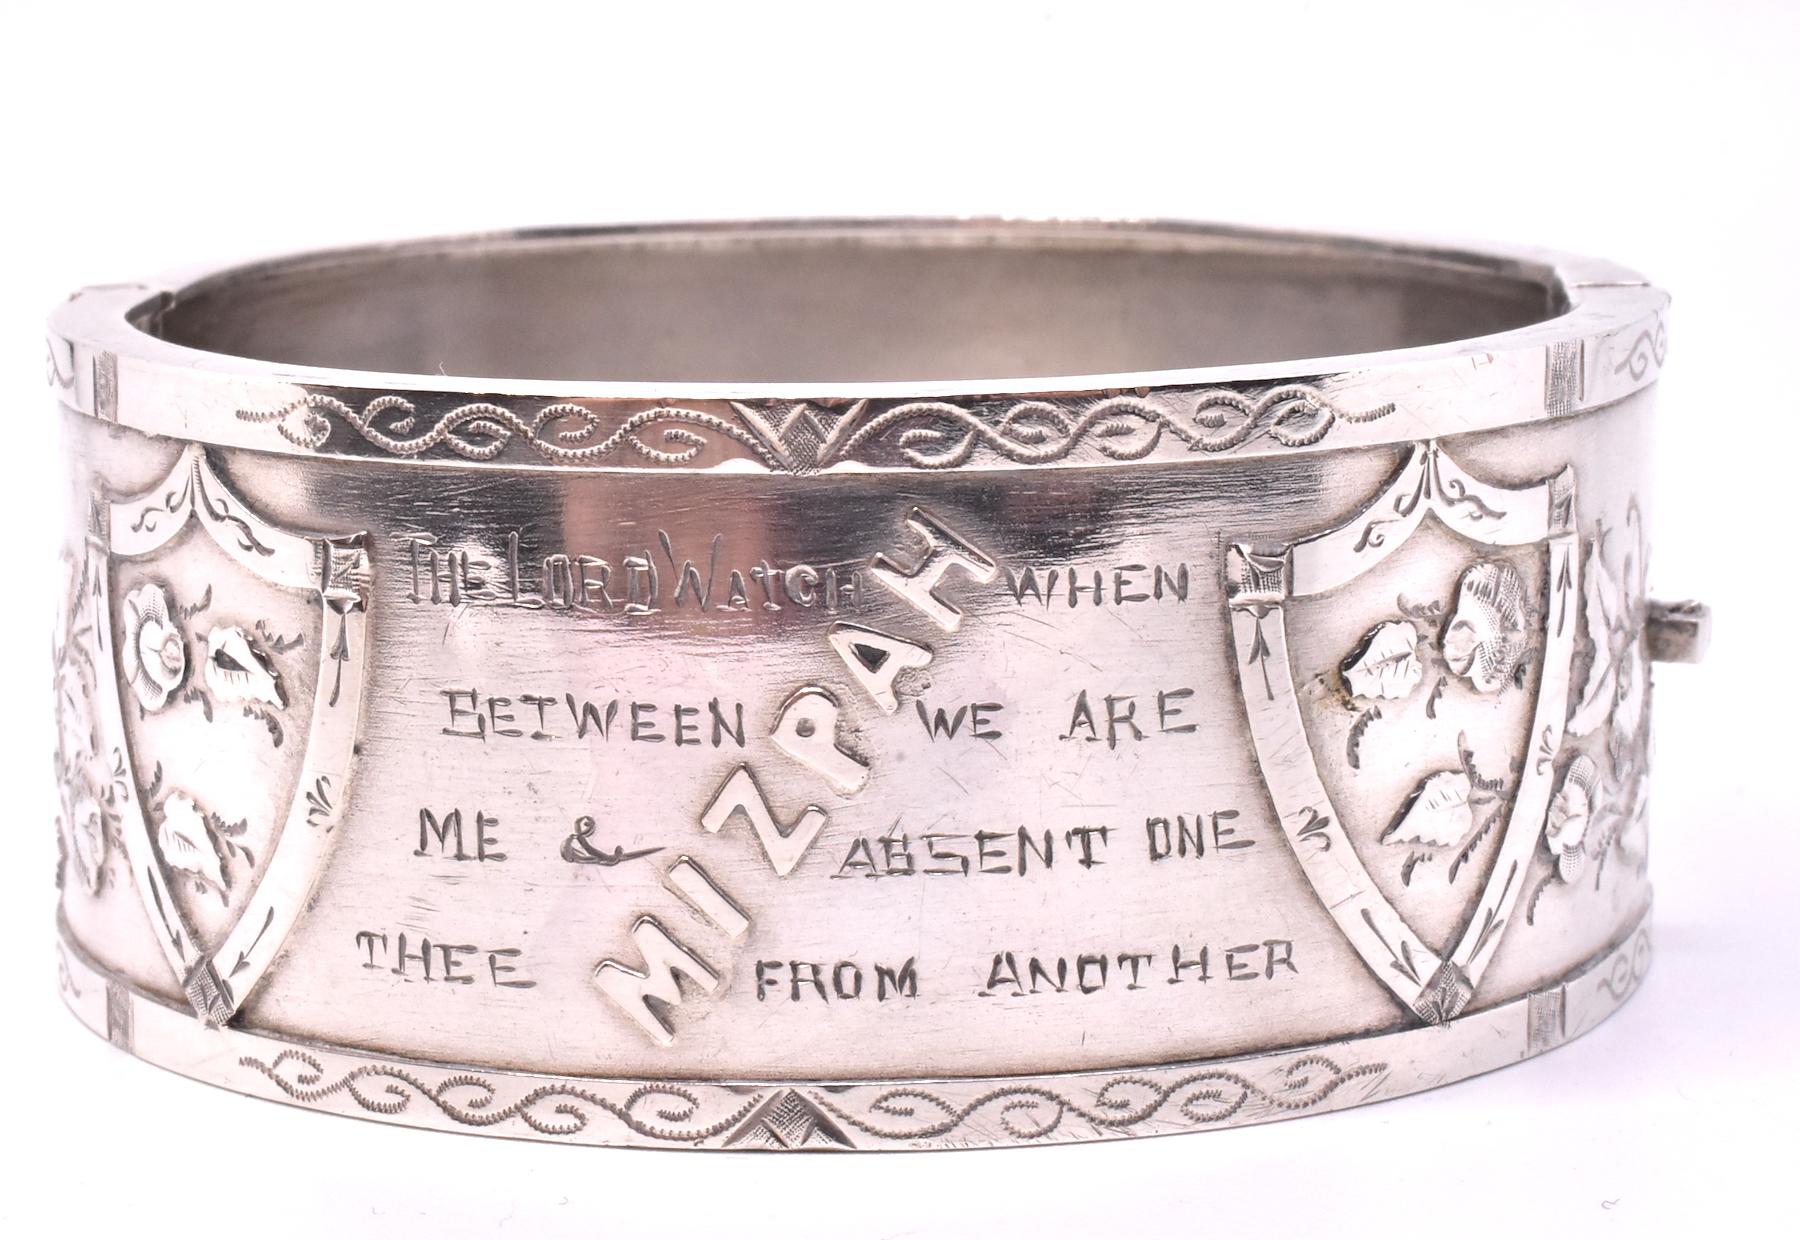 Sentimental sterling bangle bracelet bearing the biblical Mizpah inscription, signifying an emotional bond between two people physically separated due to acts of war or other calamities. It would typically be given by a lover about to be parted from